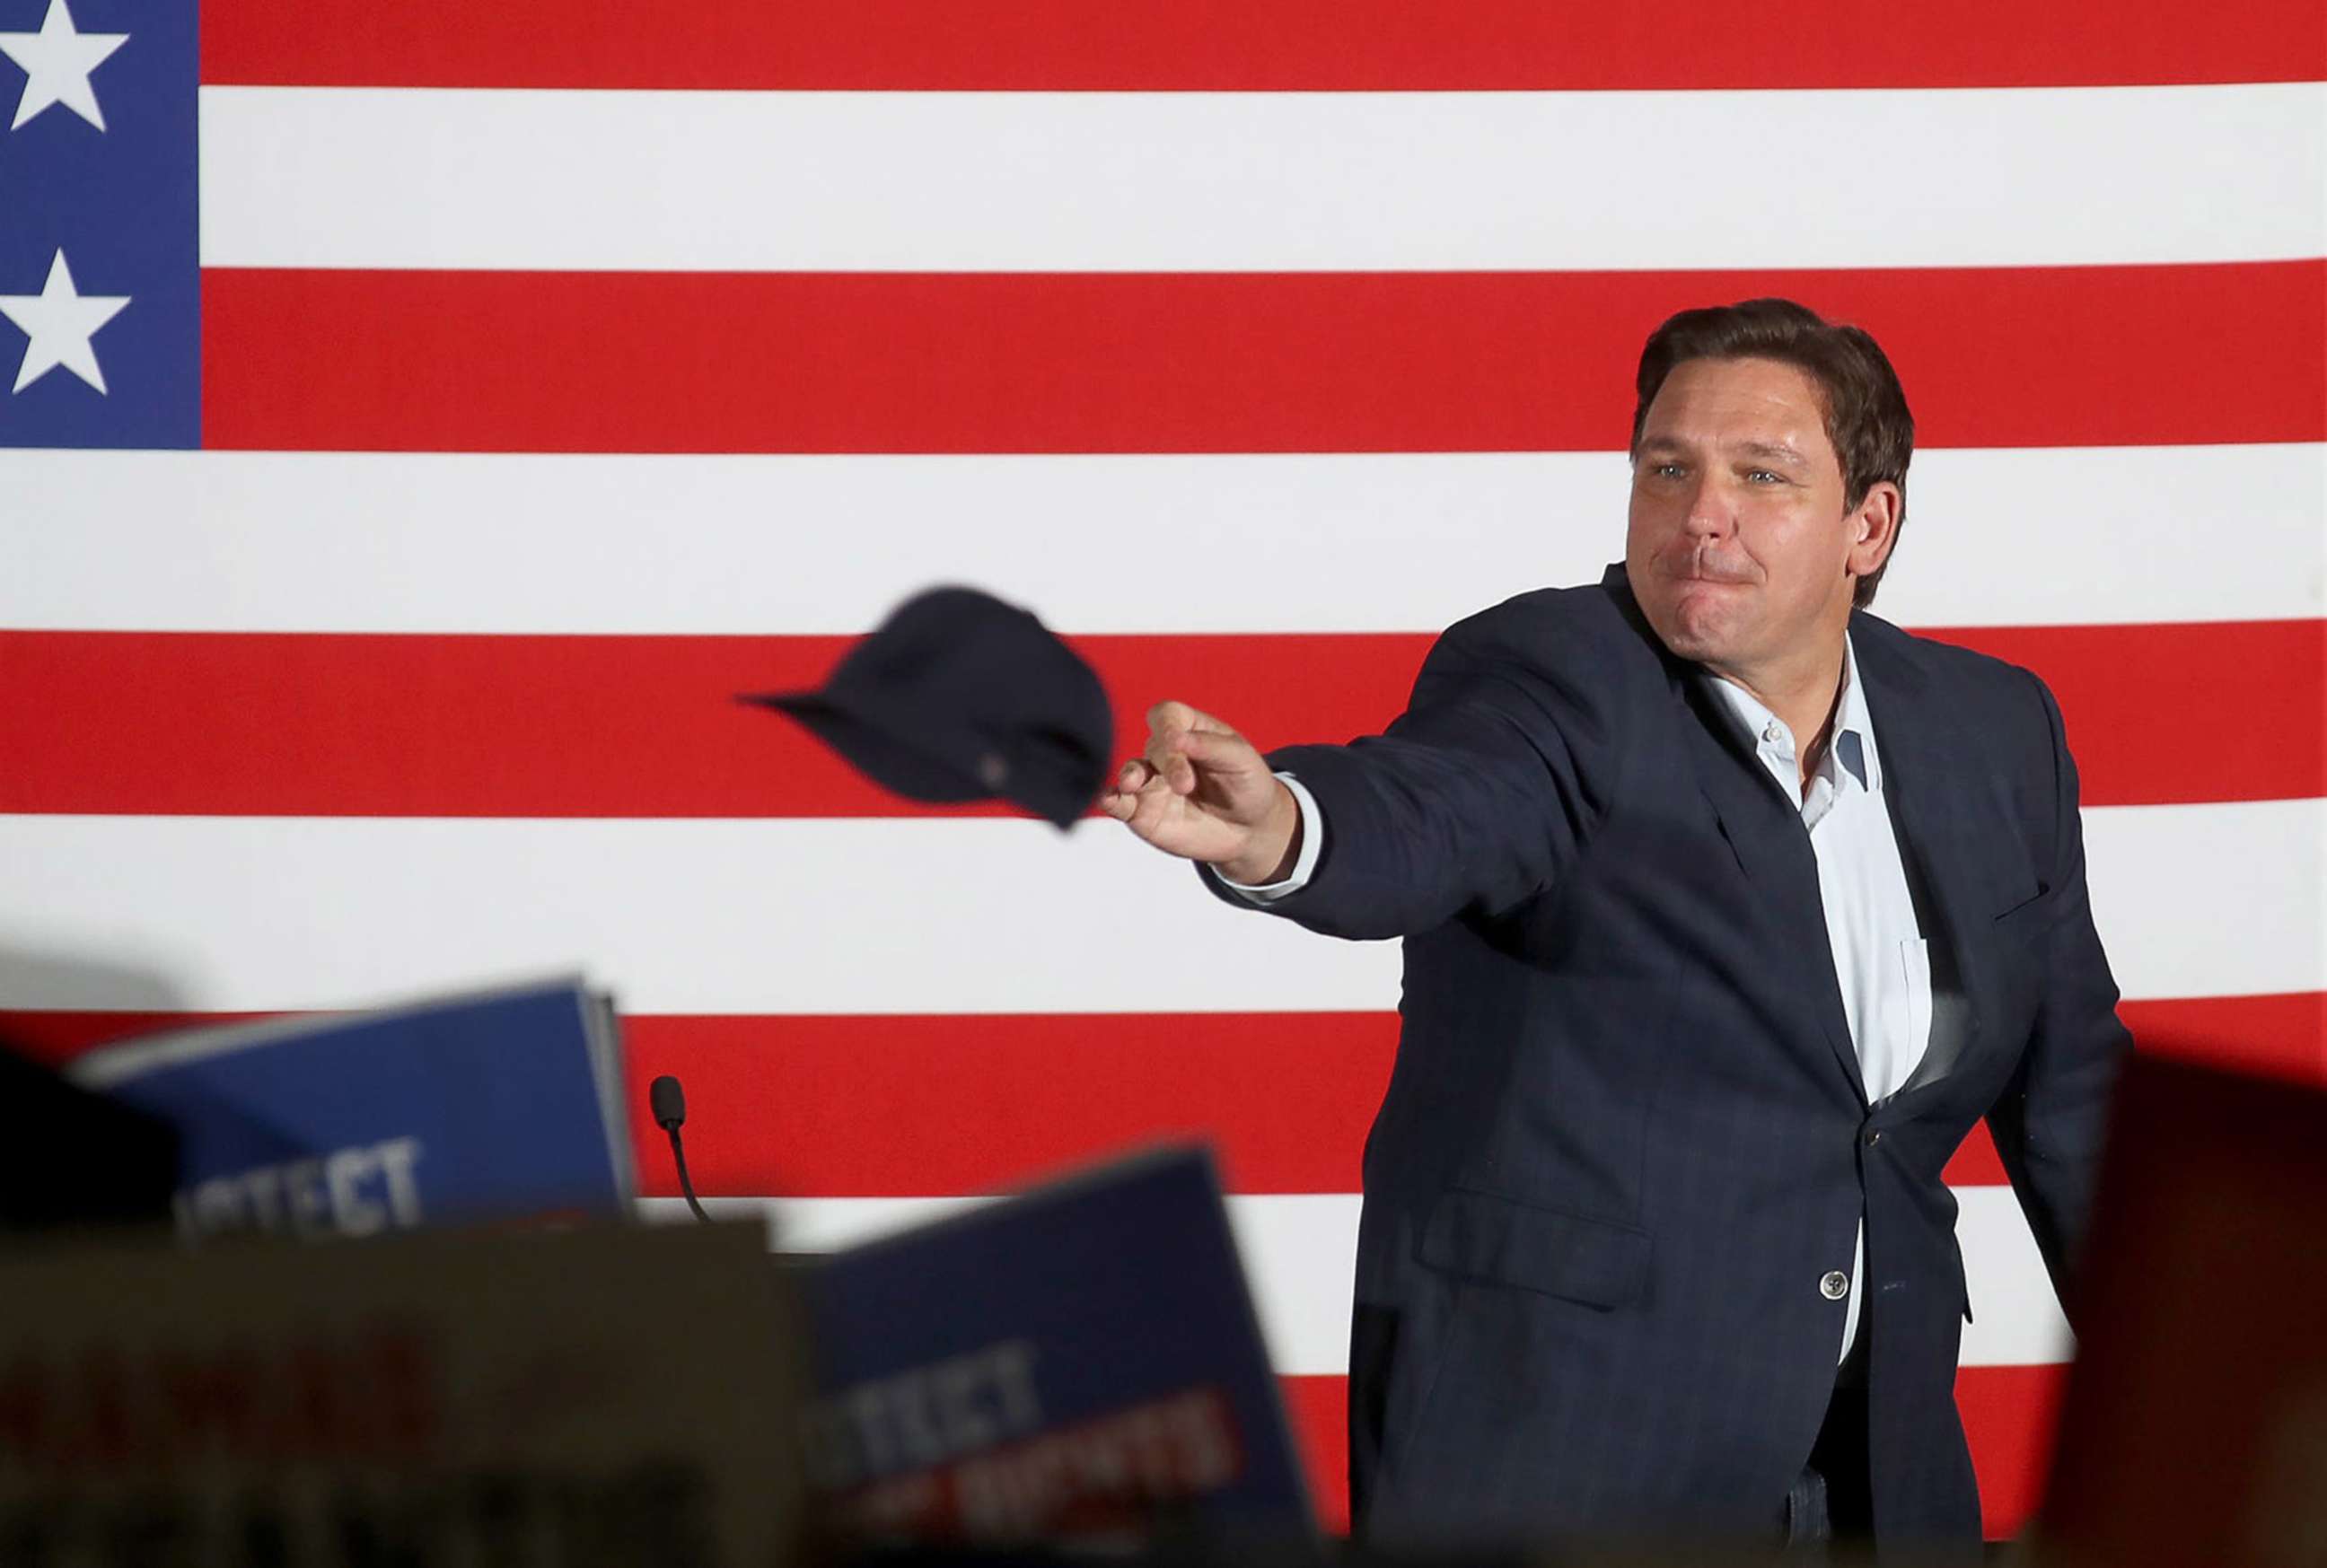 PHOTO: Florida Governor Ron DeSantis throws hats out to a crowd of supporters in Sarasota, Fla., Aug. 21, 2022.